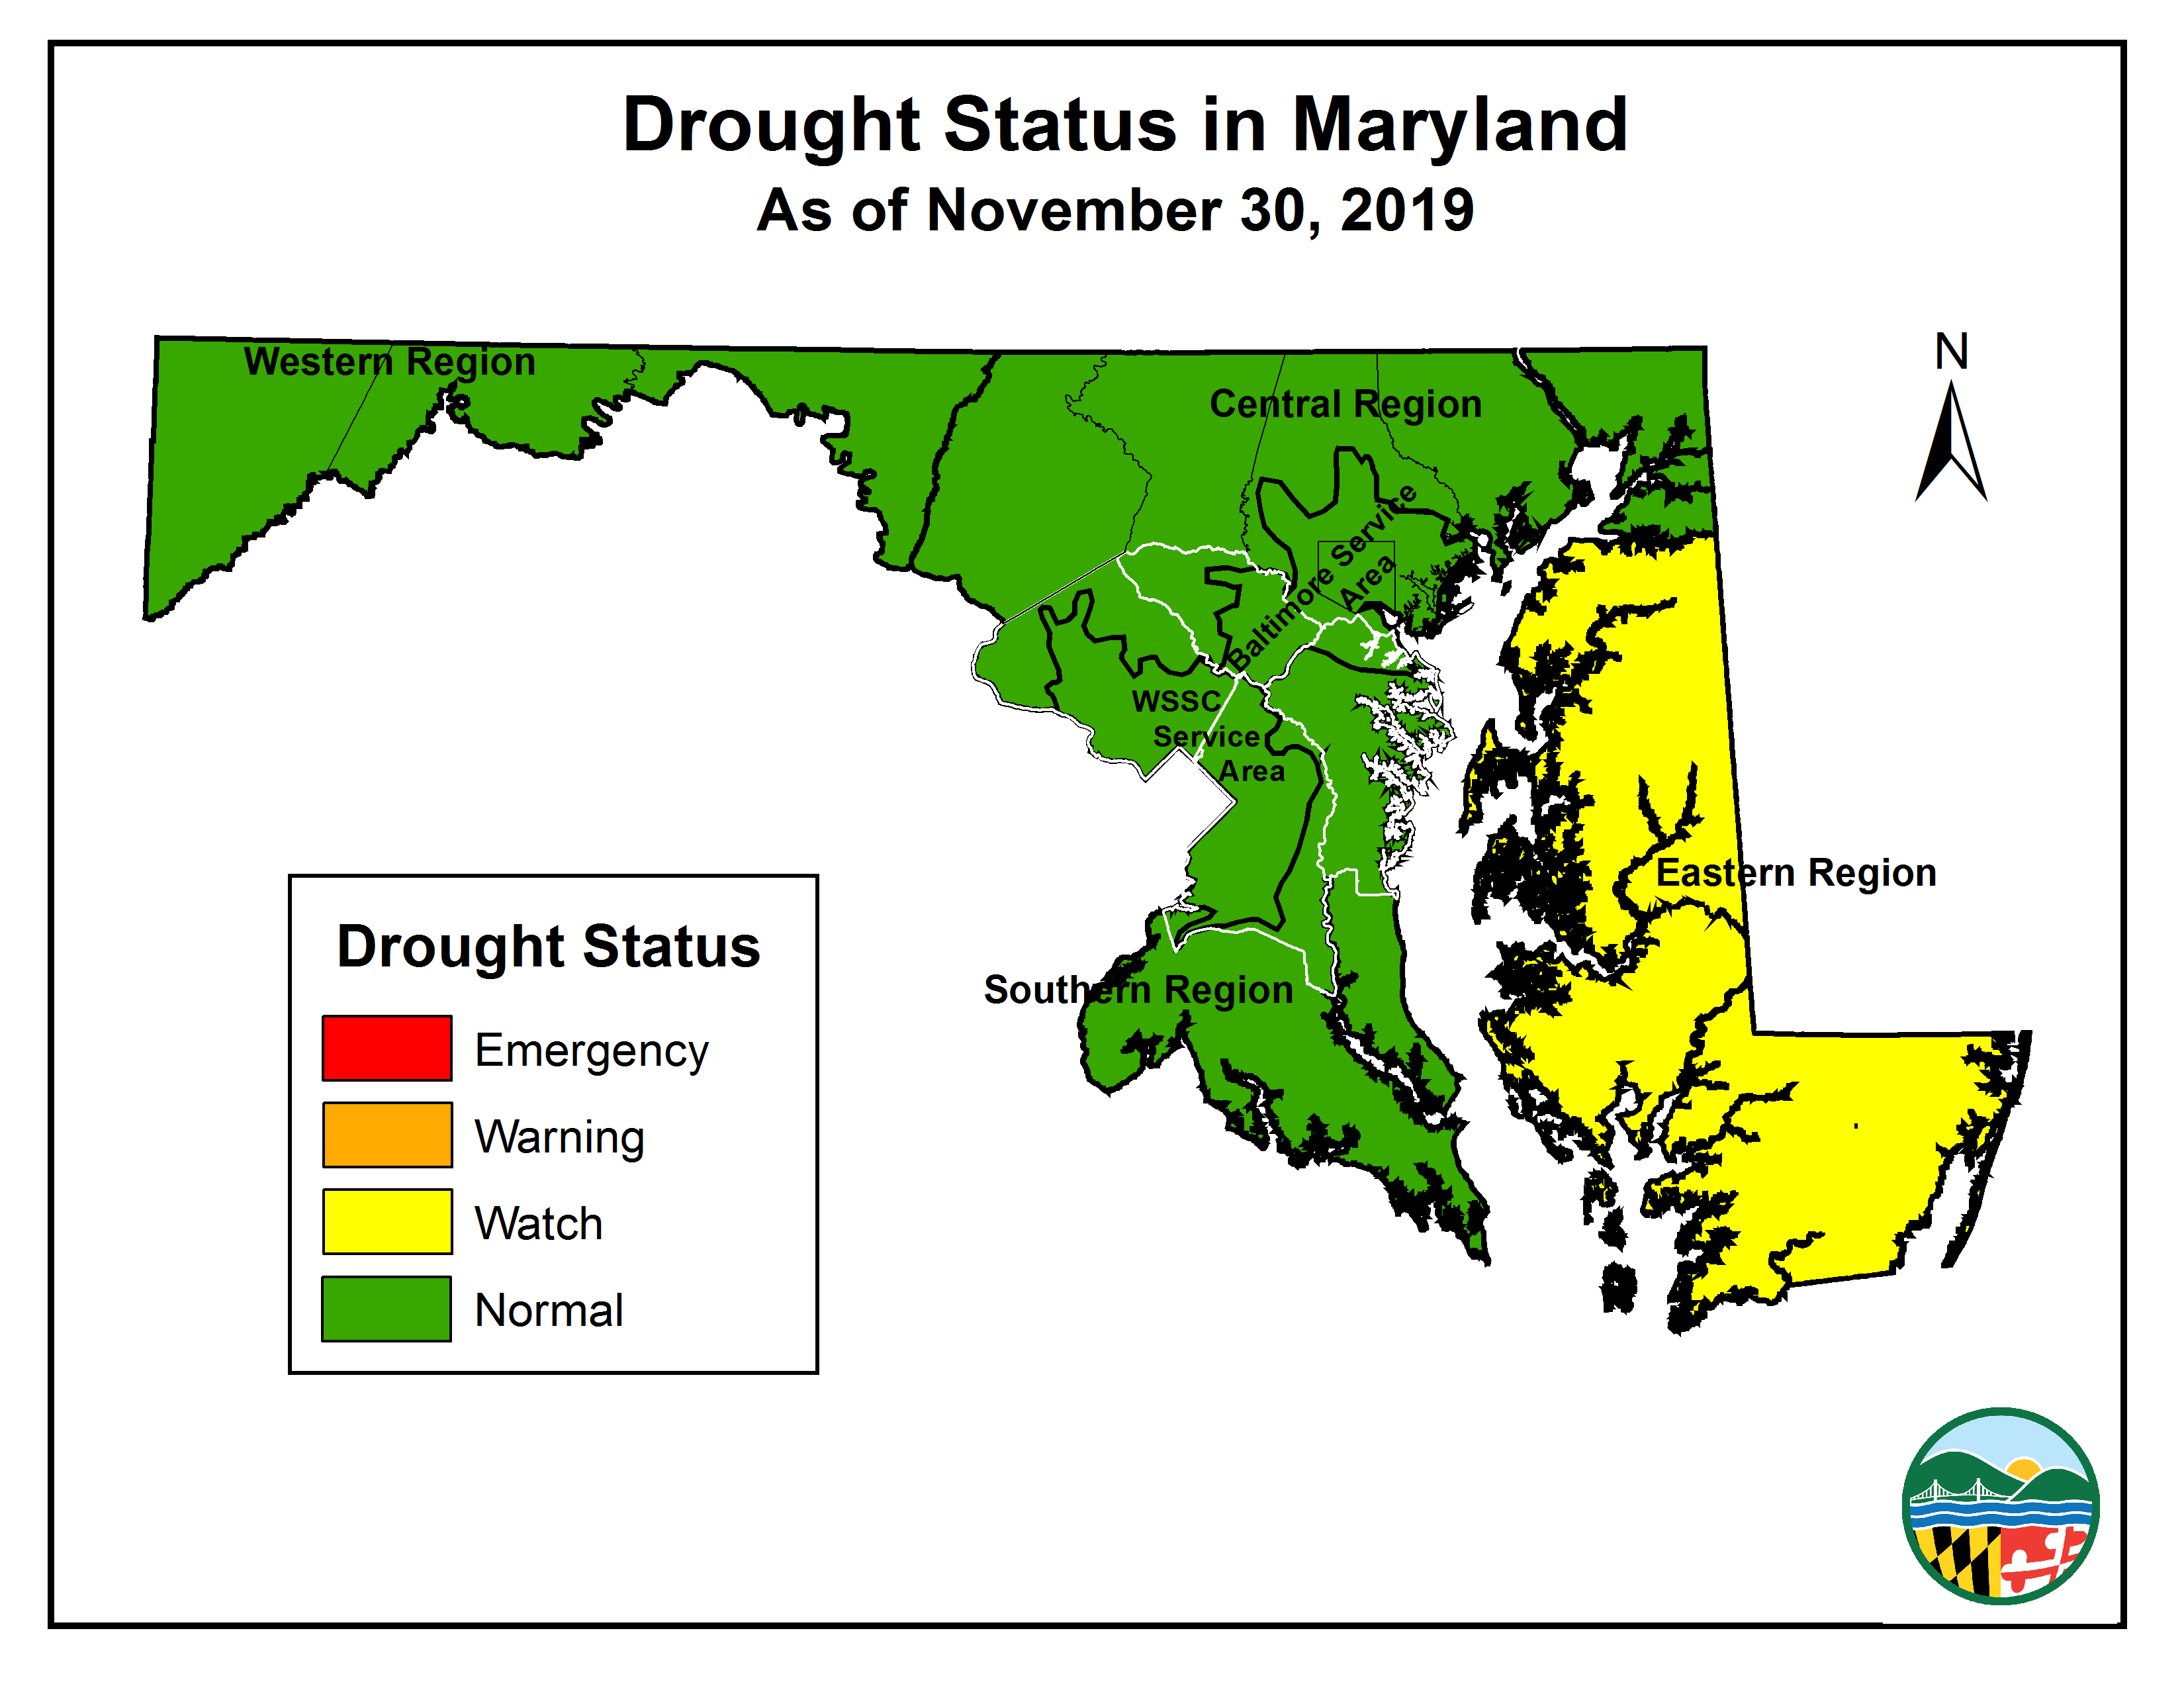 Drought Status as of 2019-10-31